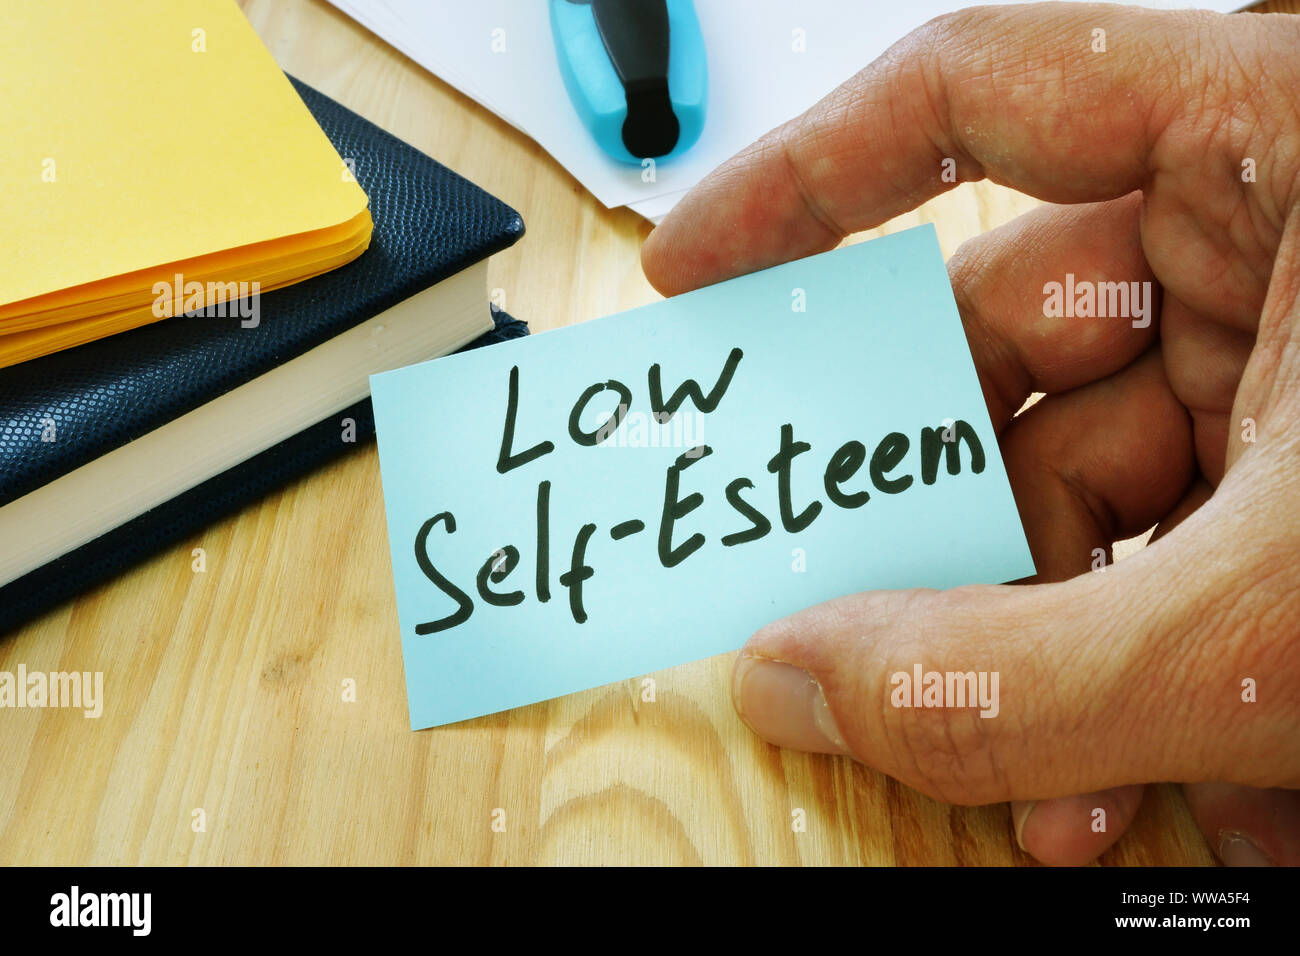 Low Self esteem sign in the hand. Stock Photo